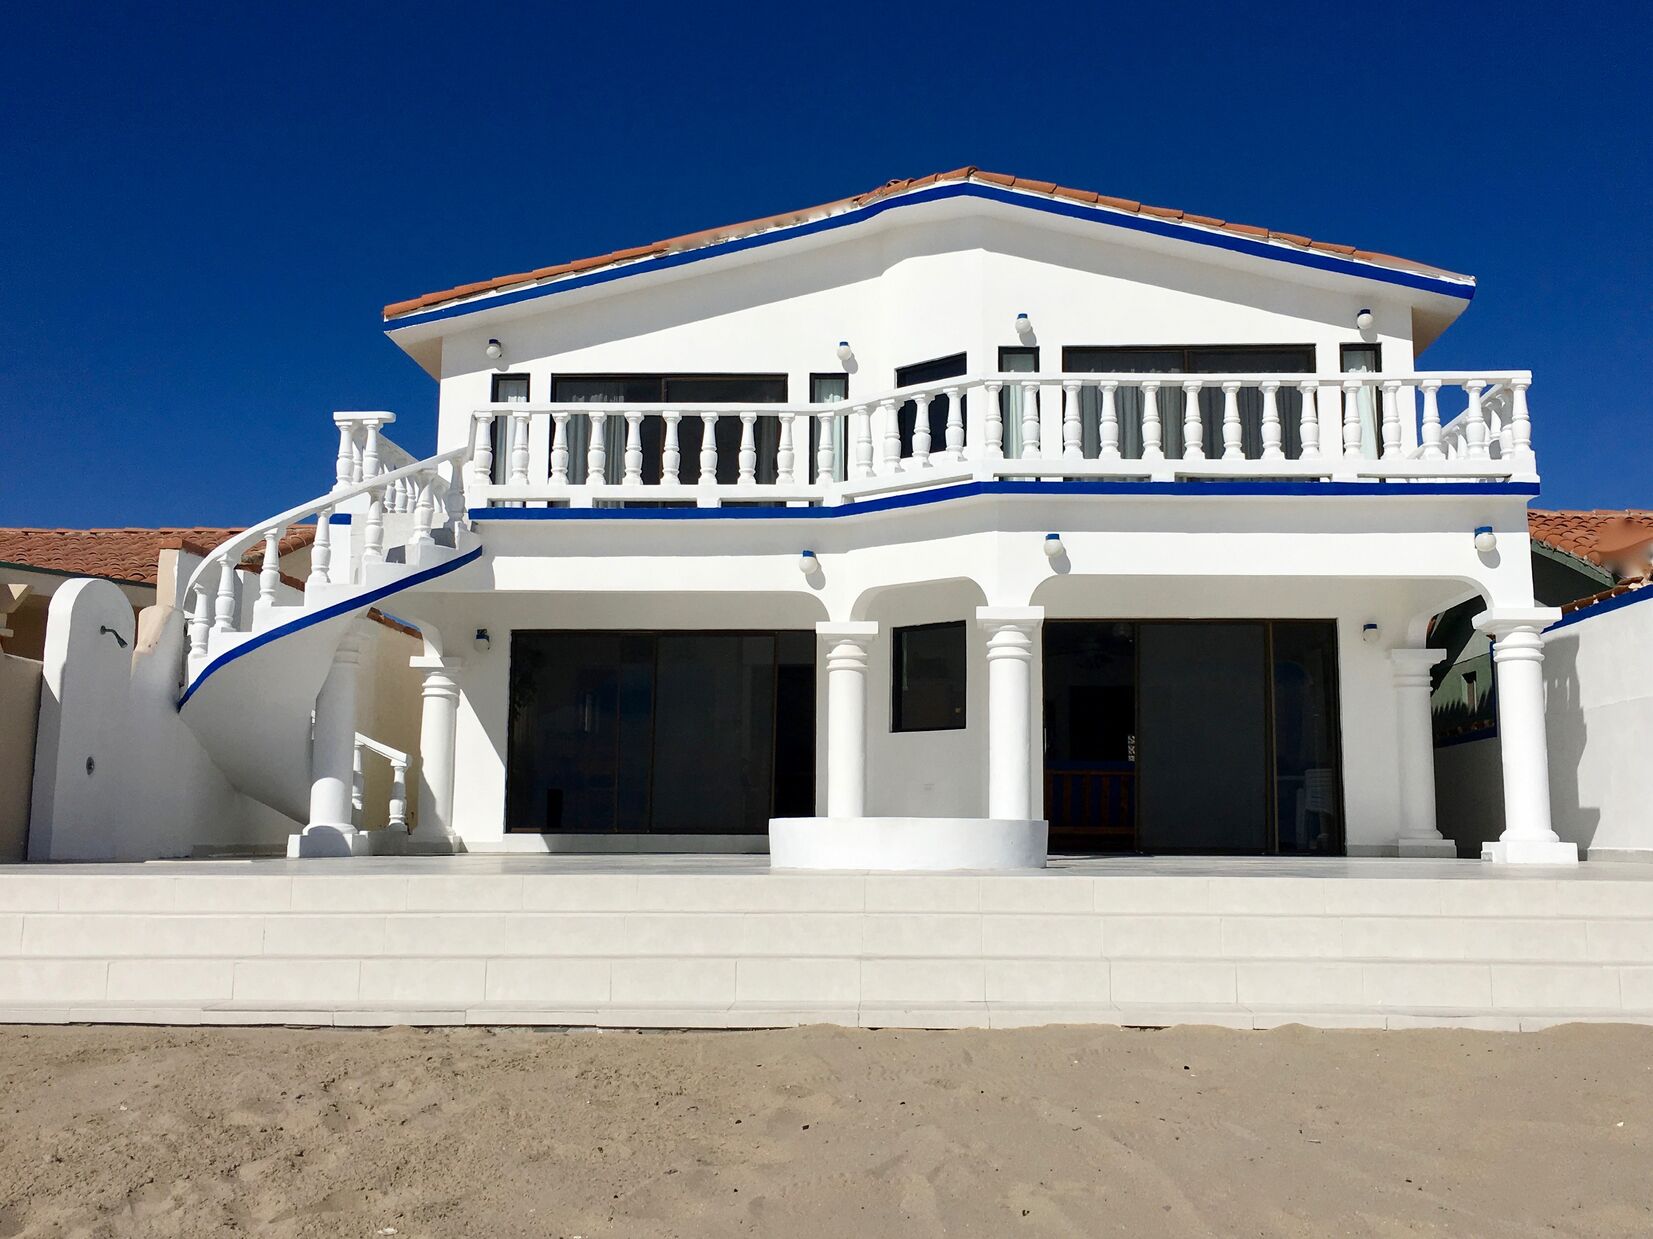 View of the house from the beach